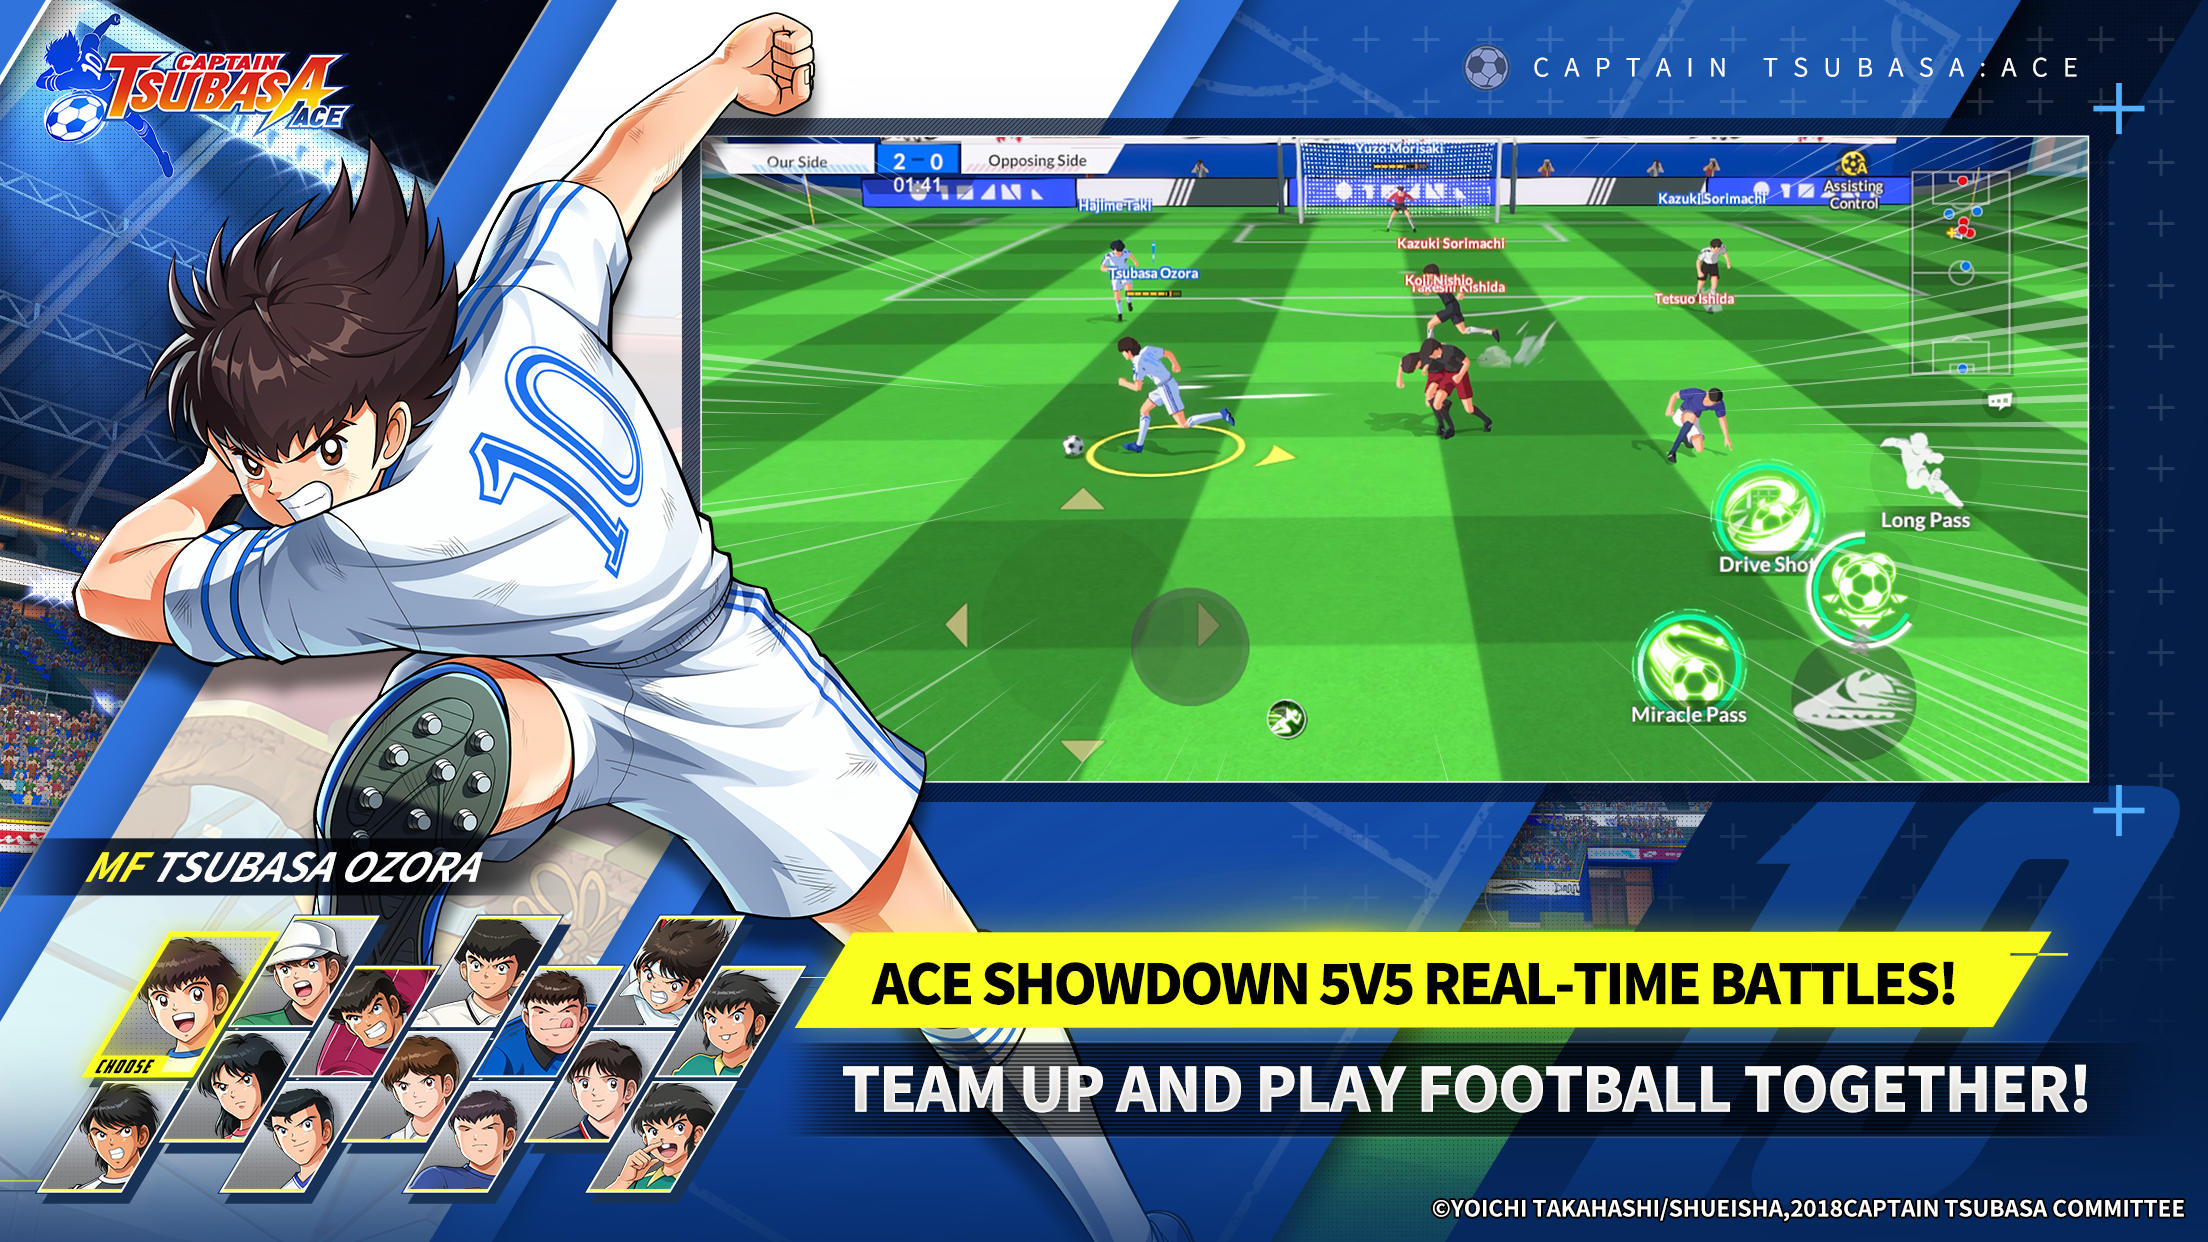 Download Free Head Soccer for iOS - Iphone - Technology Ace